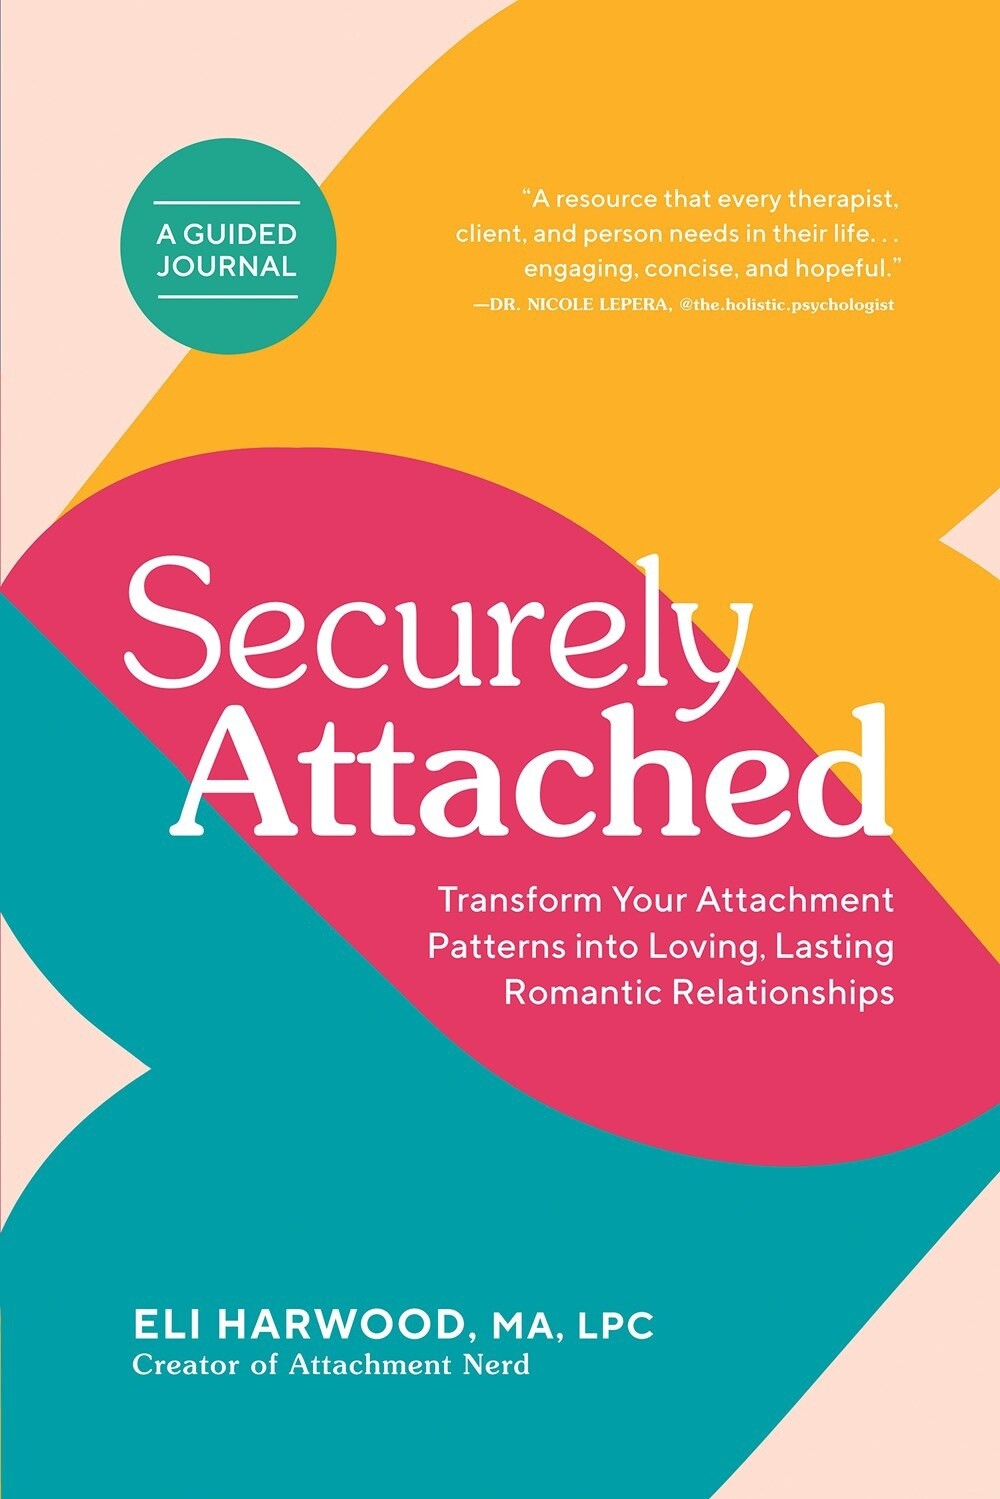 Securely Attached : Transform Your Attachment Patterns into Loving, Lasting Romantic Relationships ( A Guided Journal)